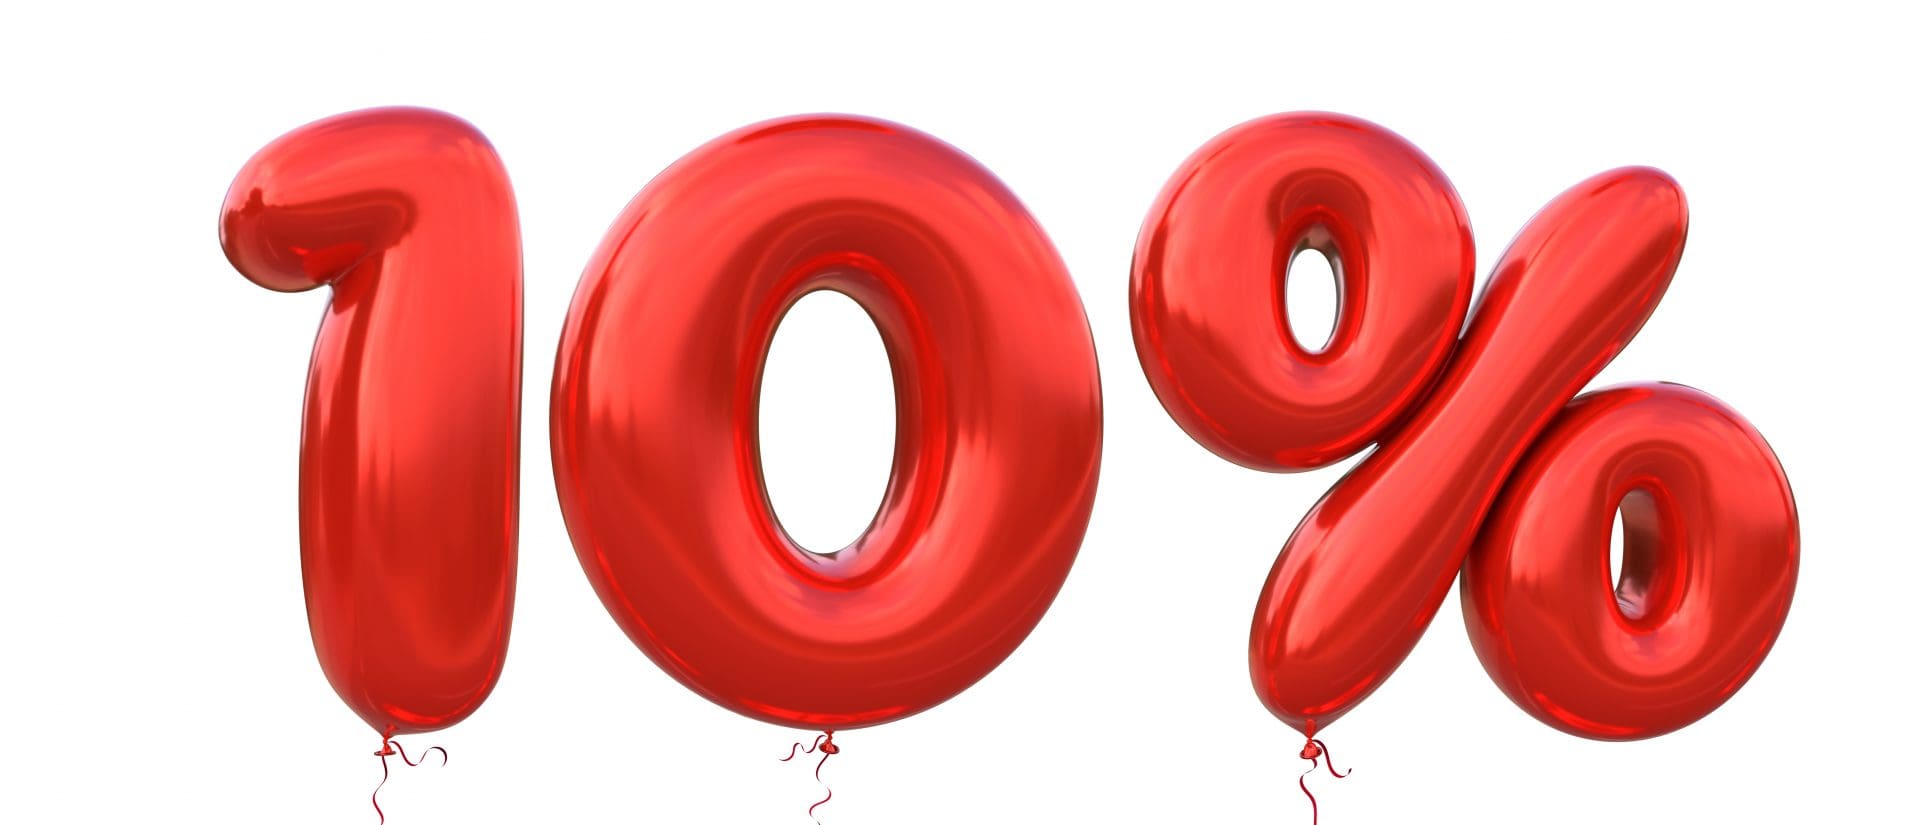 An illustration of red balloons showing 10%